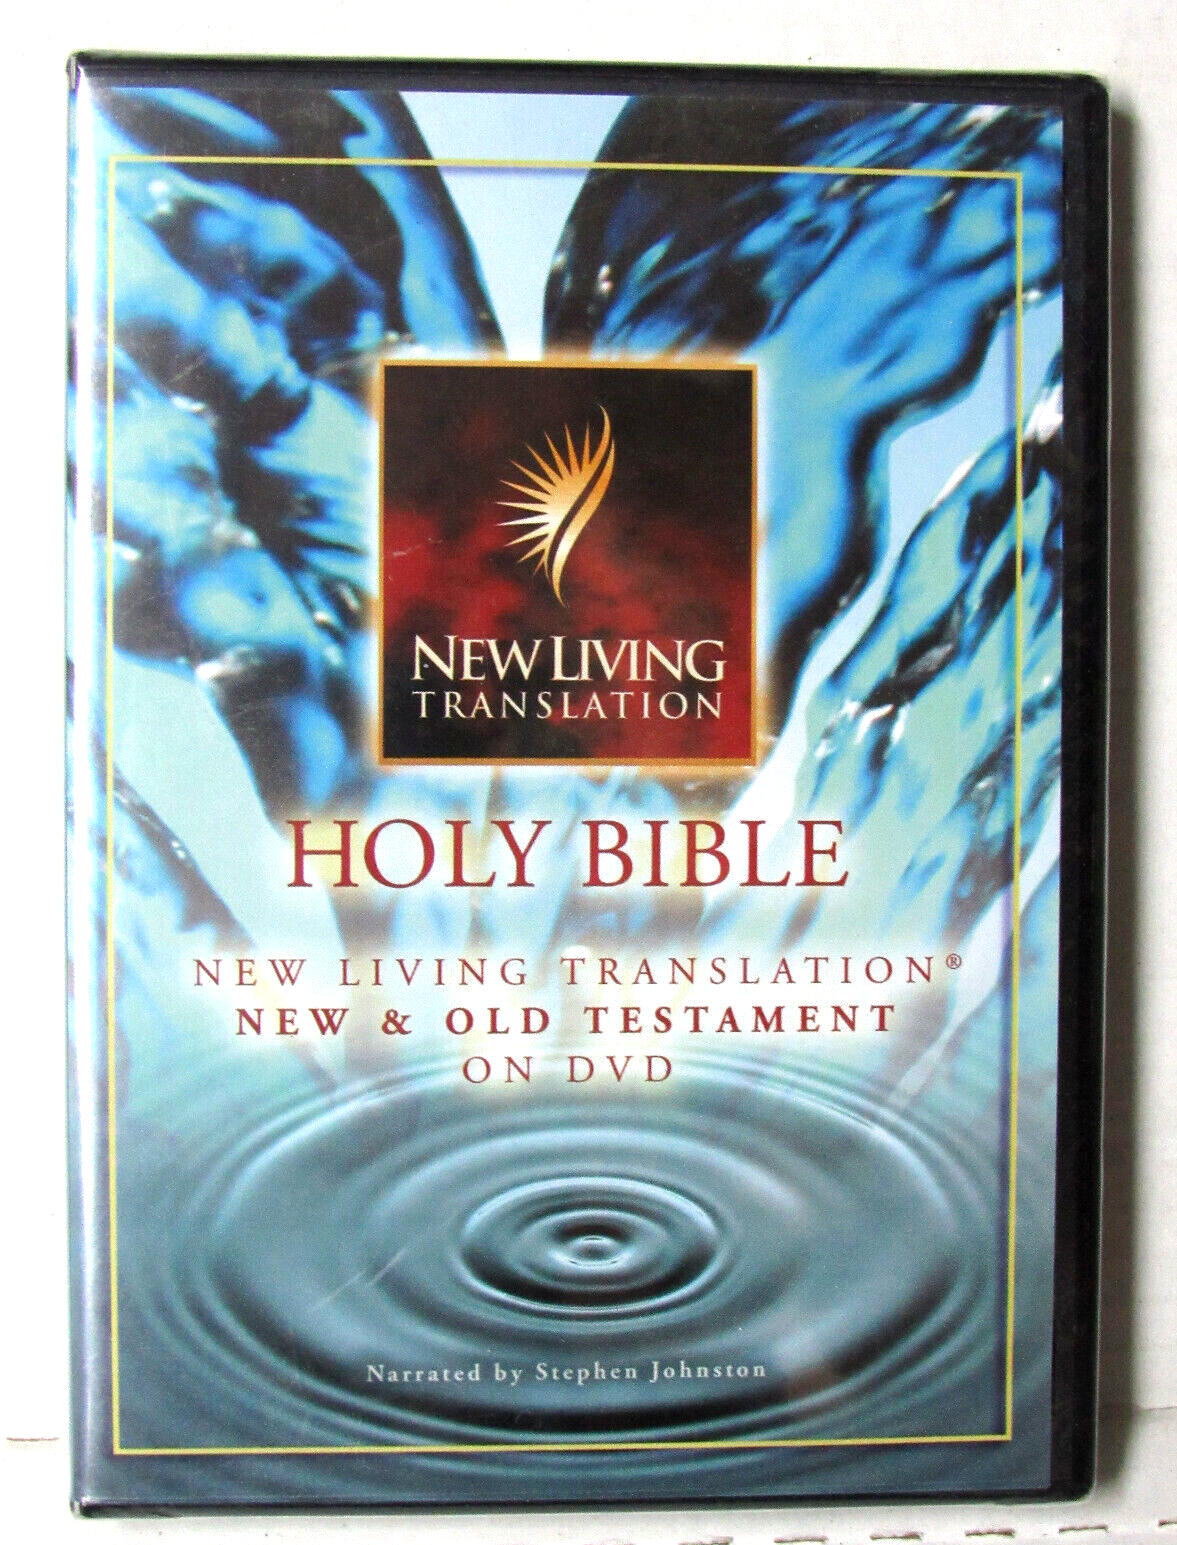 DVD NLT New And Old Testament By Stephen Johnson